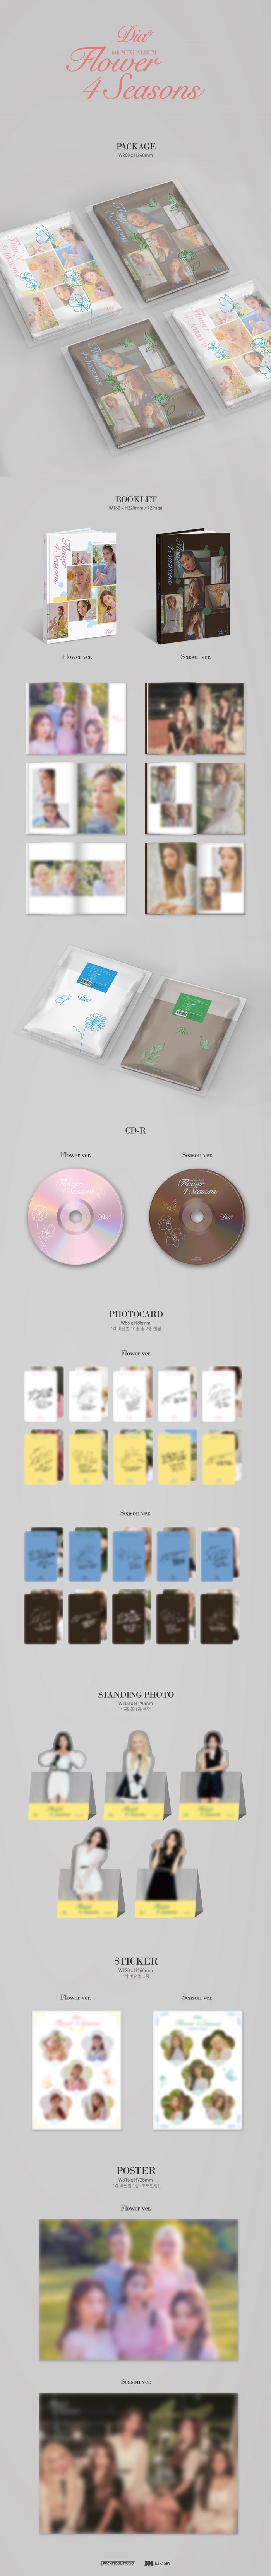 1 CD
1 Booklet (72 pages)
2 Photo Cards
1 Standing Photo
1 Sticker